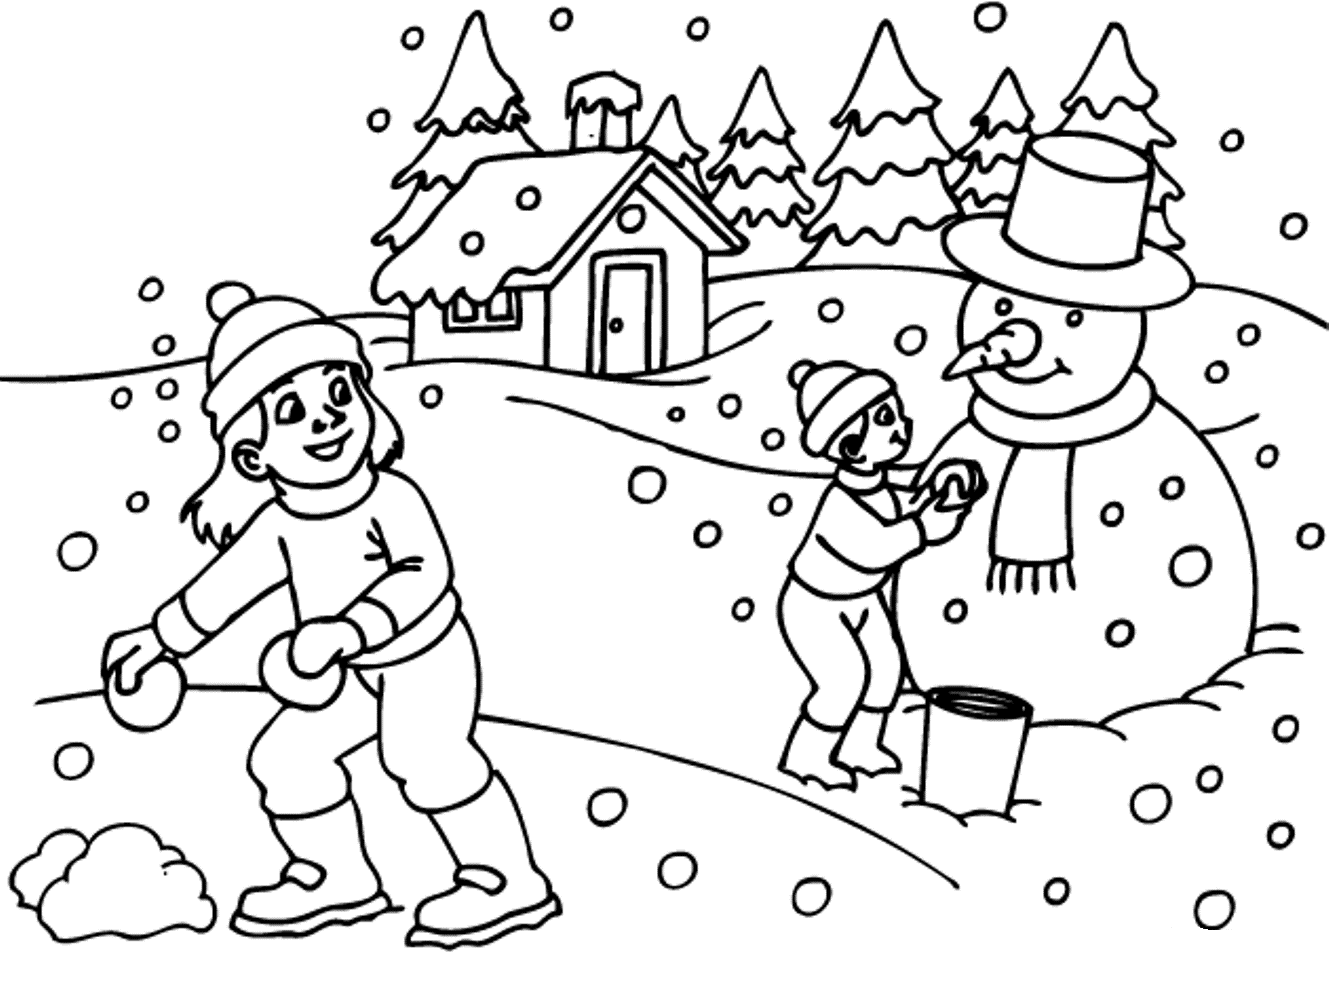 Playing Snow In The Winter Coloring Pages Printable | Winter ...